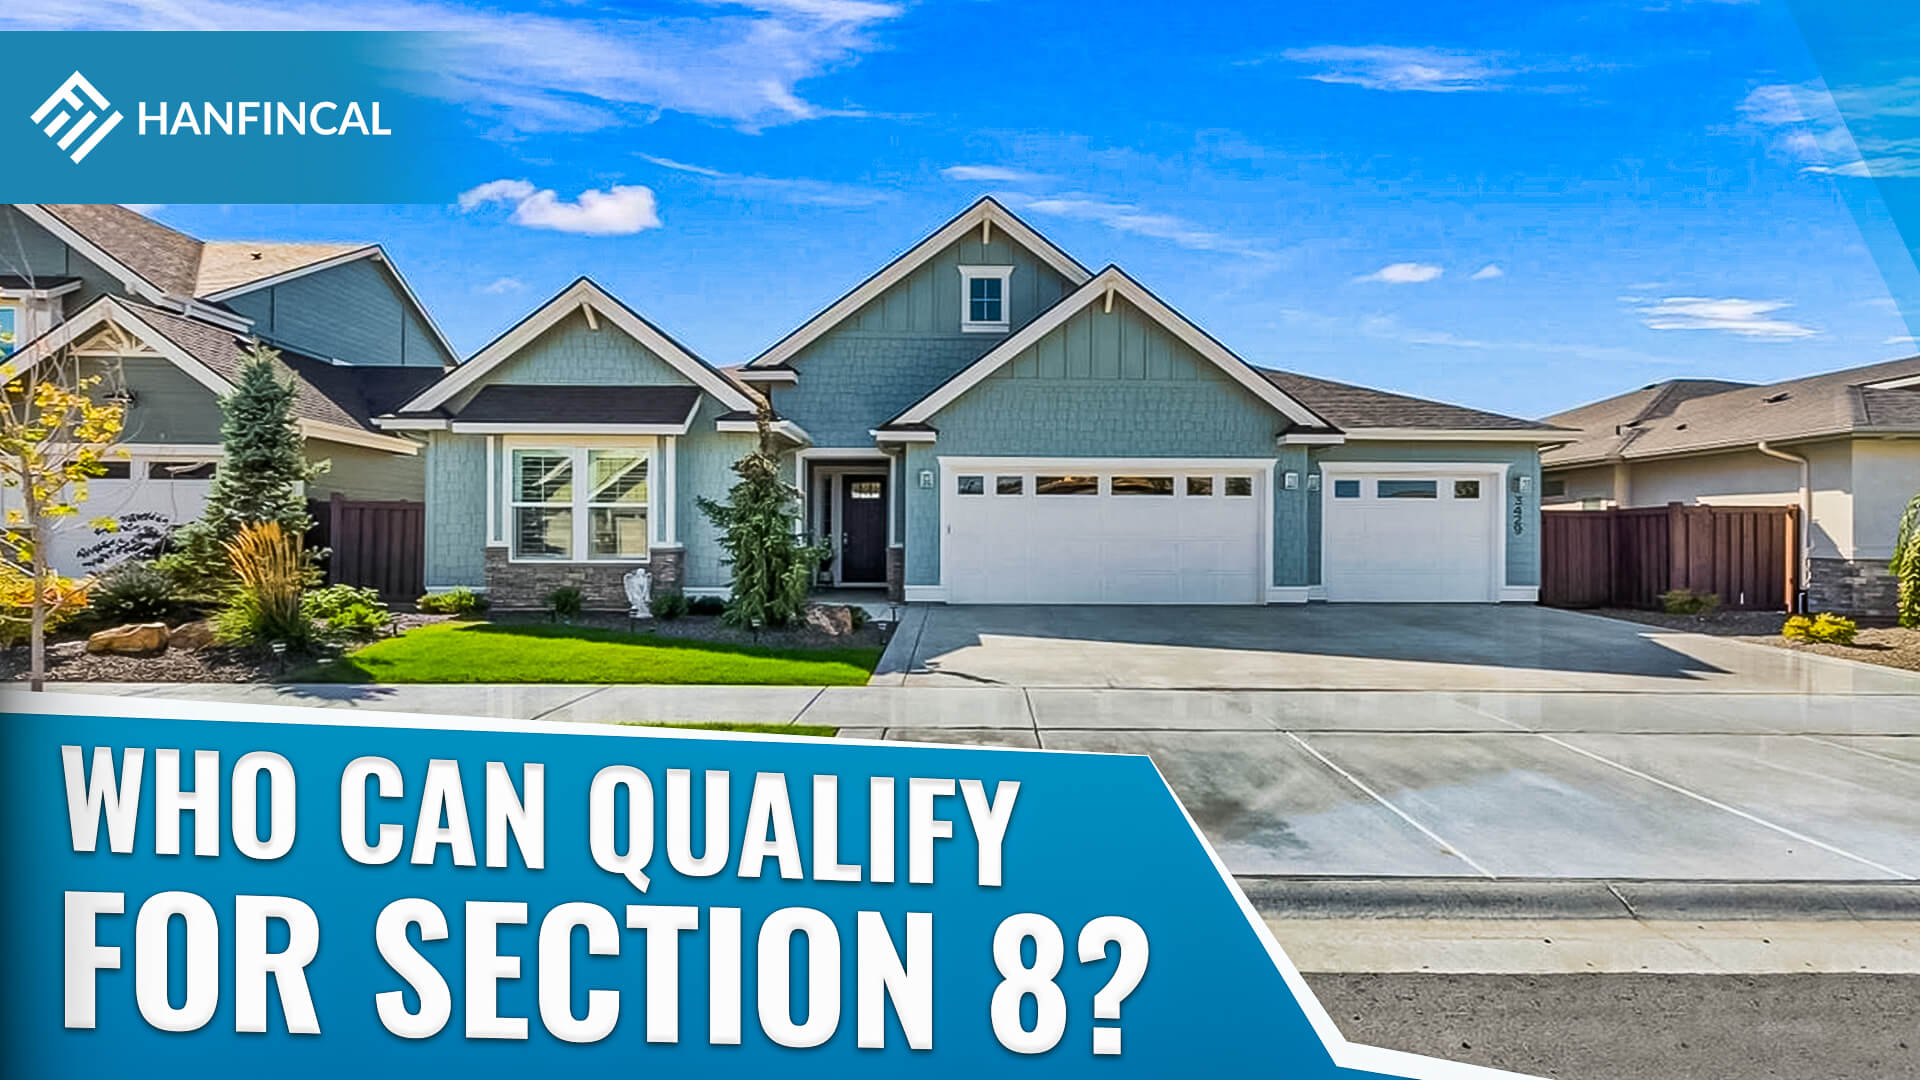 How to qualify for Section 8 Housing in Idaho